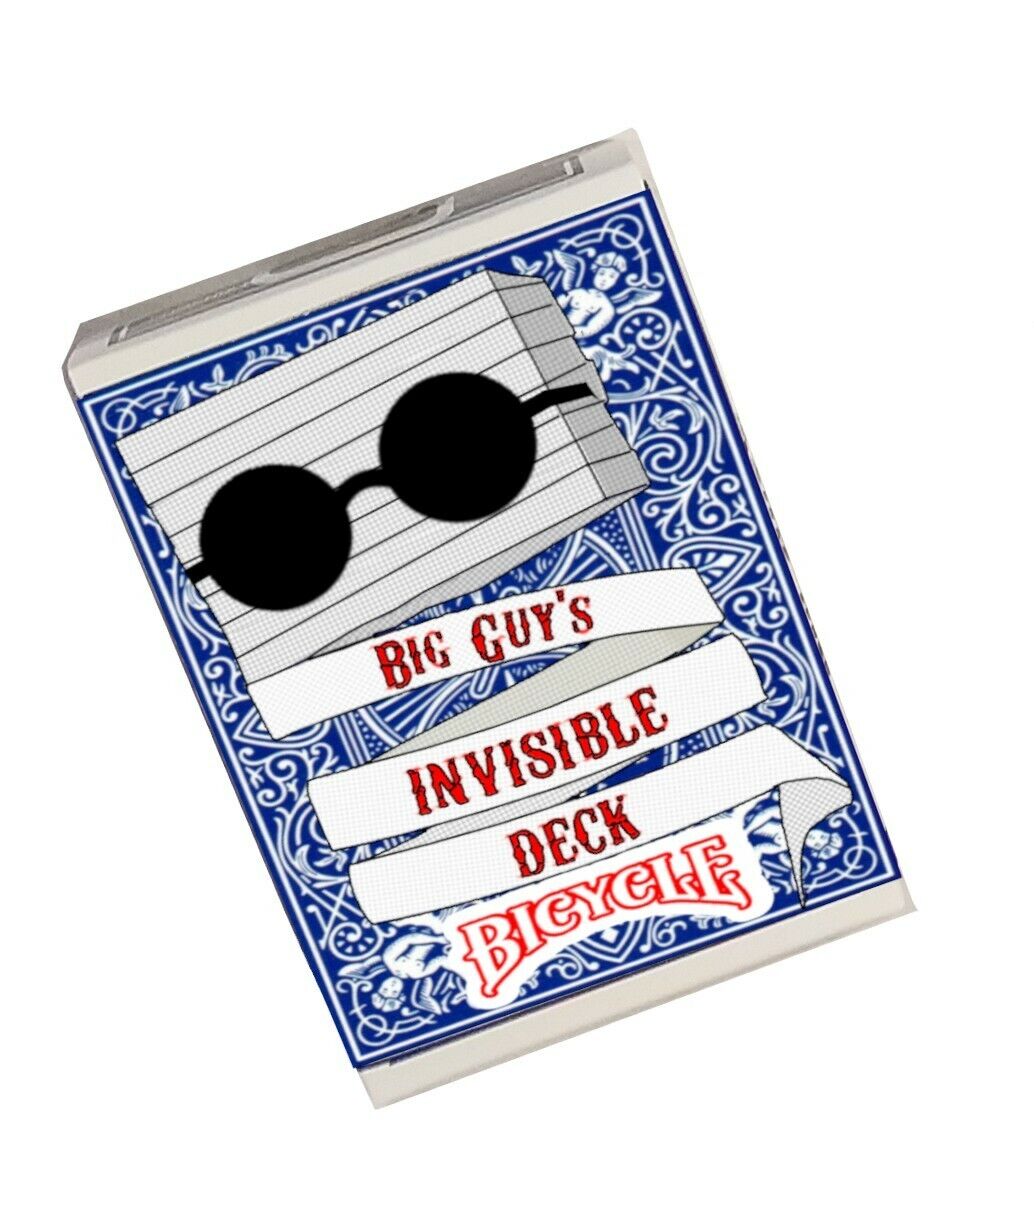 Big Guy’s Invisible Deck - Bicycle (Blue) by Big Guy’s Magic